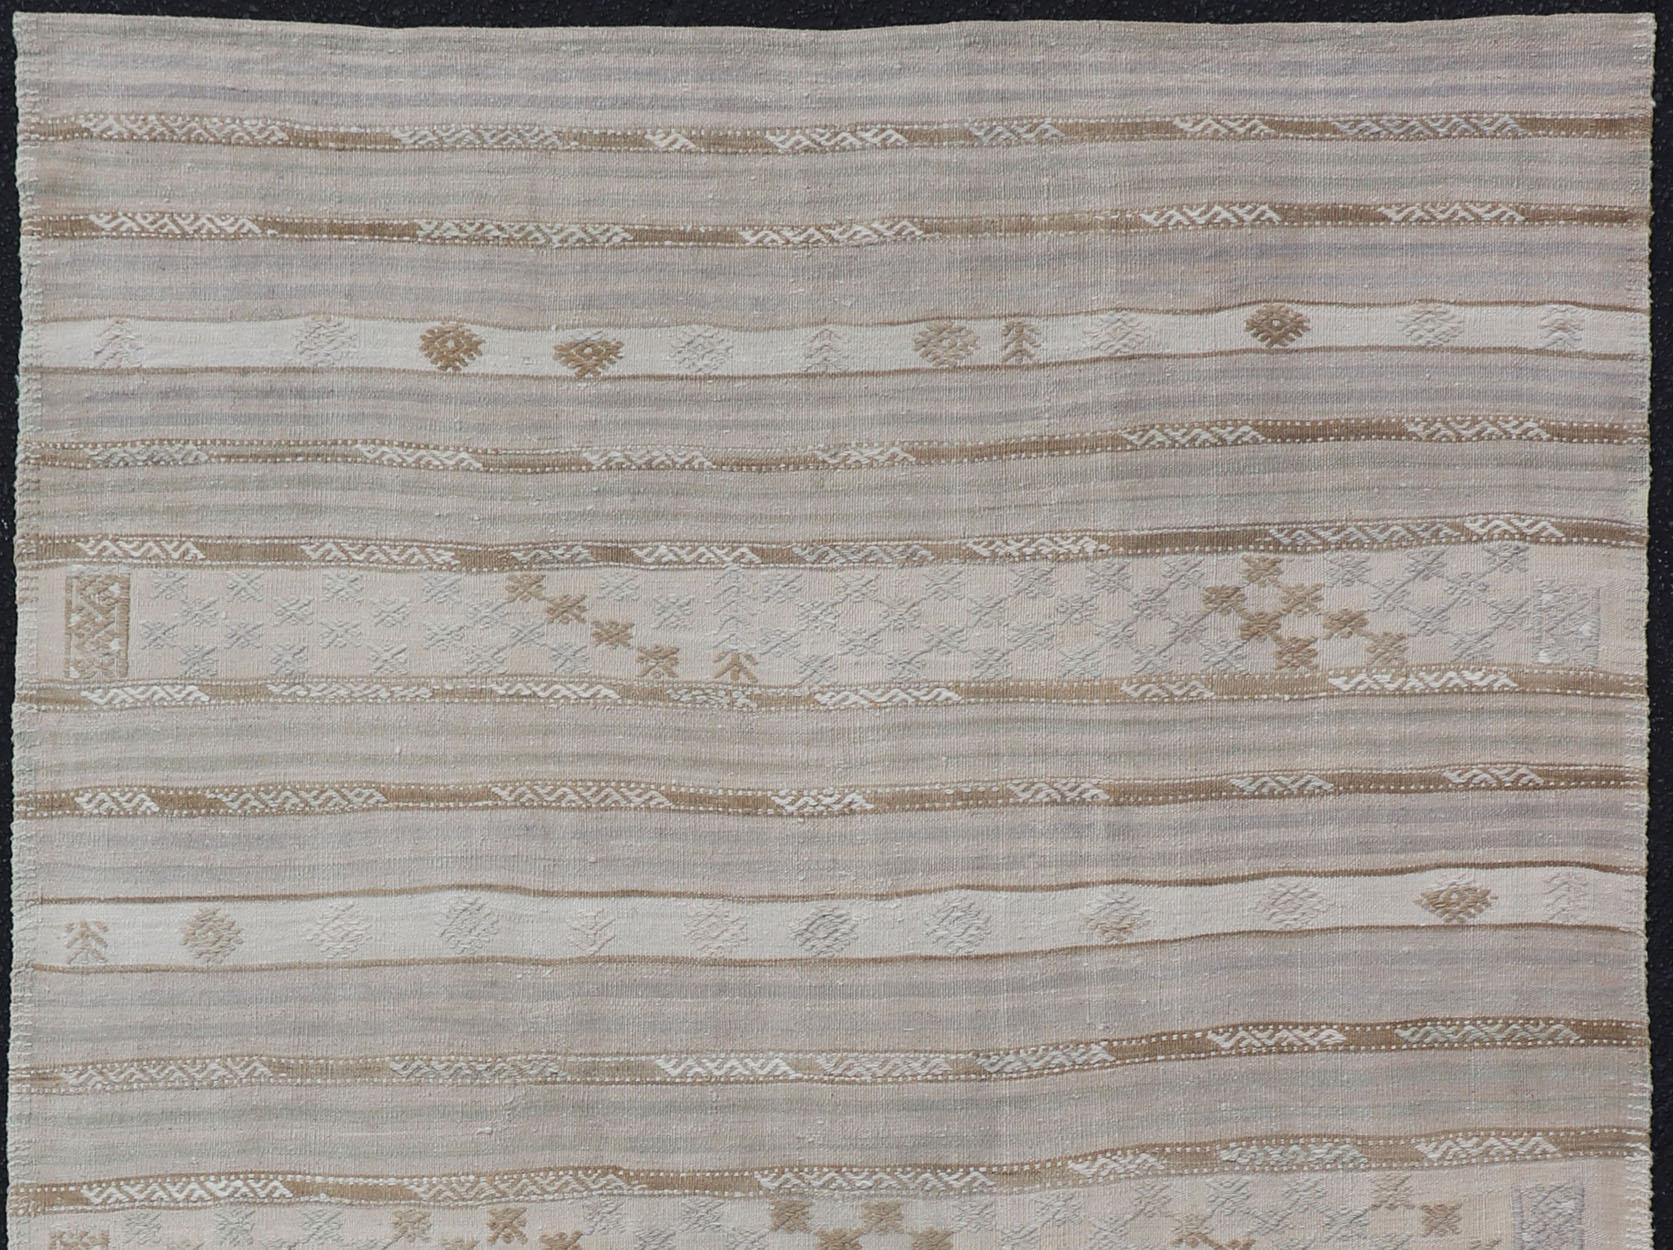 Turkish Kilim vintage carpet in light taupe, pale lavender, light brown, light gray and Cream, rug EN-179780, country of origin / type: Turkey / Kilim , circa 1950

This Kilim rug from Turkey features a striped design of various geometric patterns